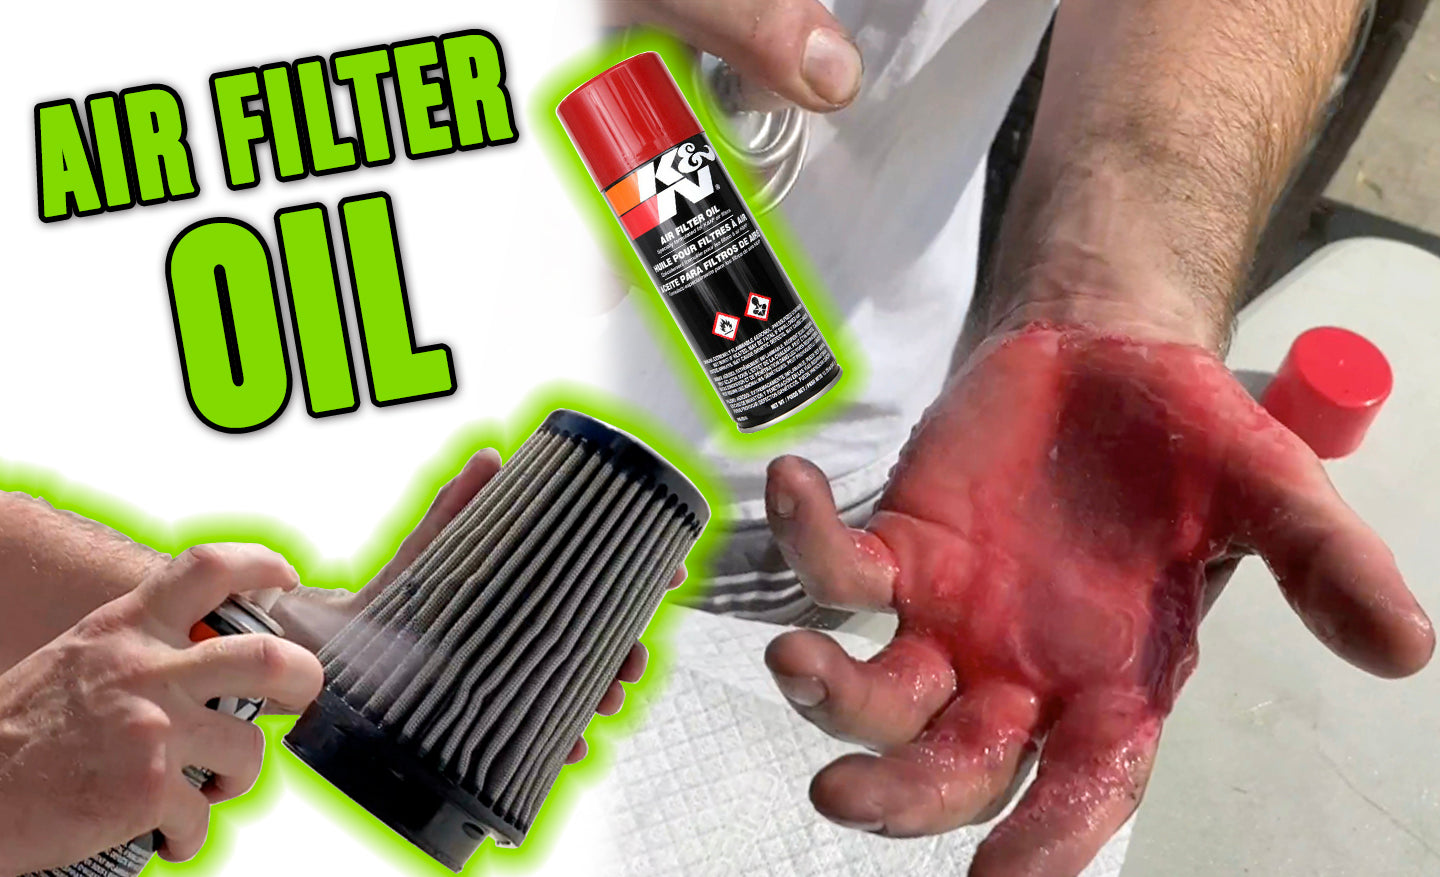 HOW TO REMOVE: Air Filter Oil